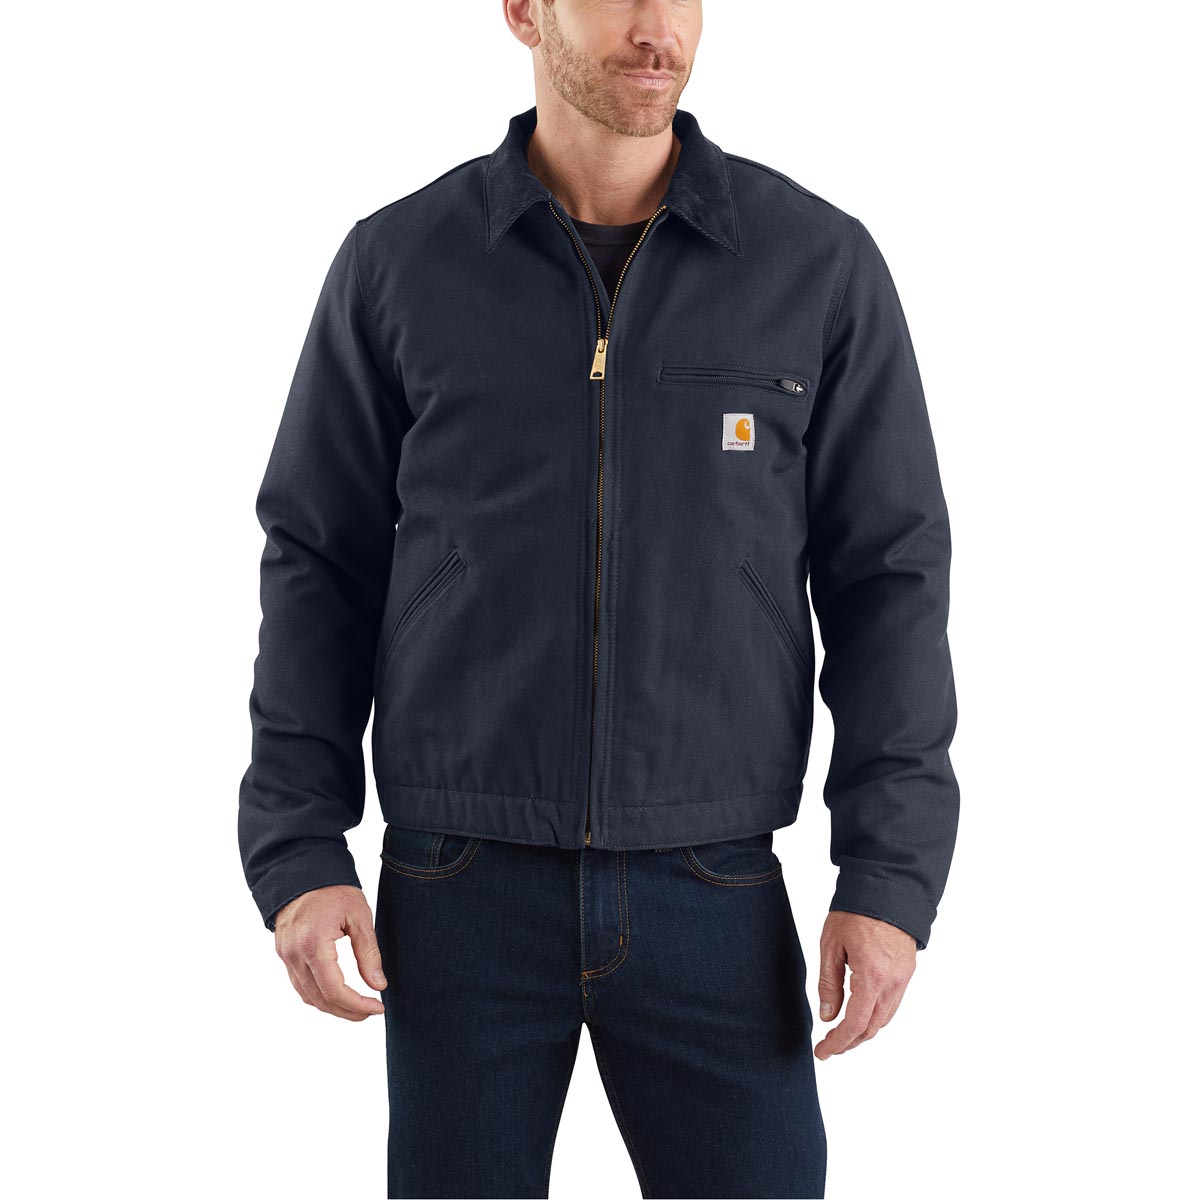 Carhartt Men's Relaxed Fit Blanket Lined Detroit Jacket - Discontinued Pricing